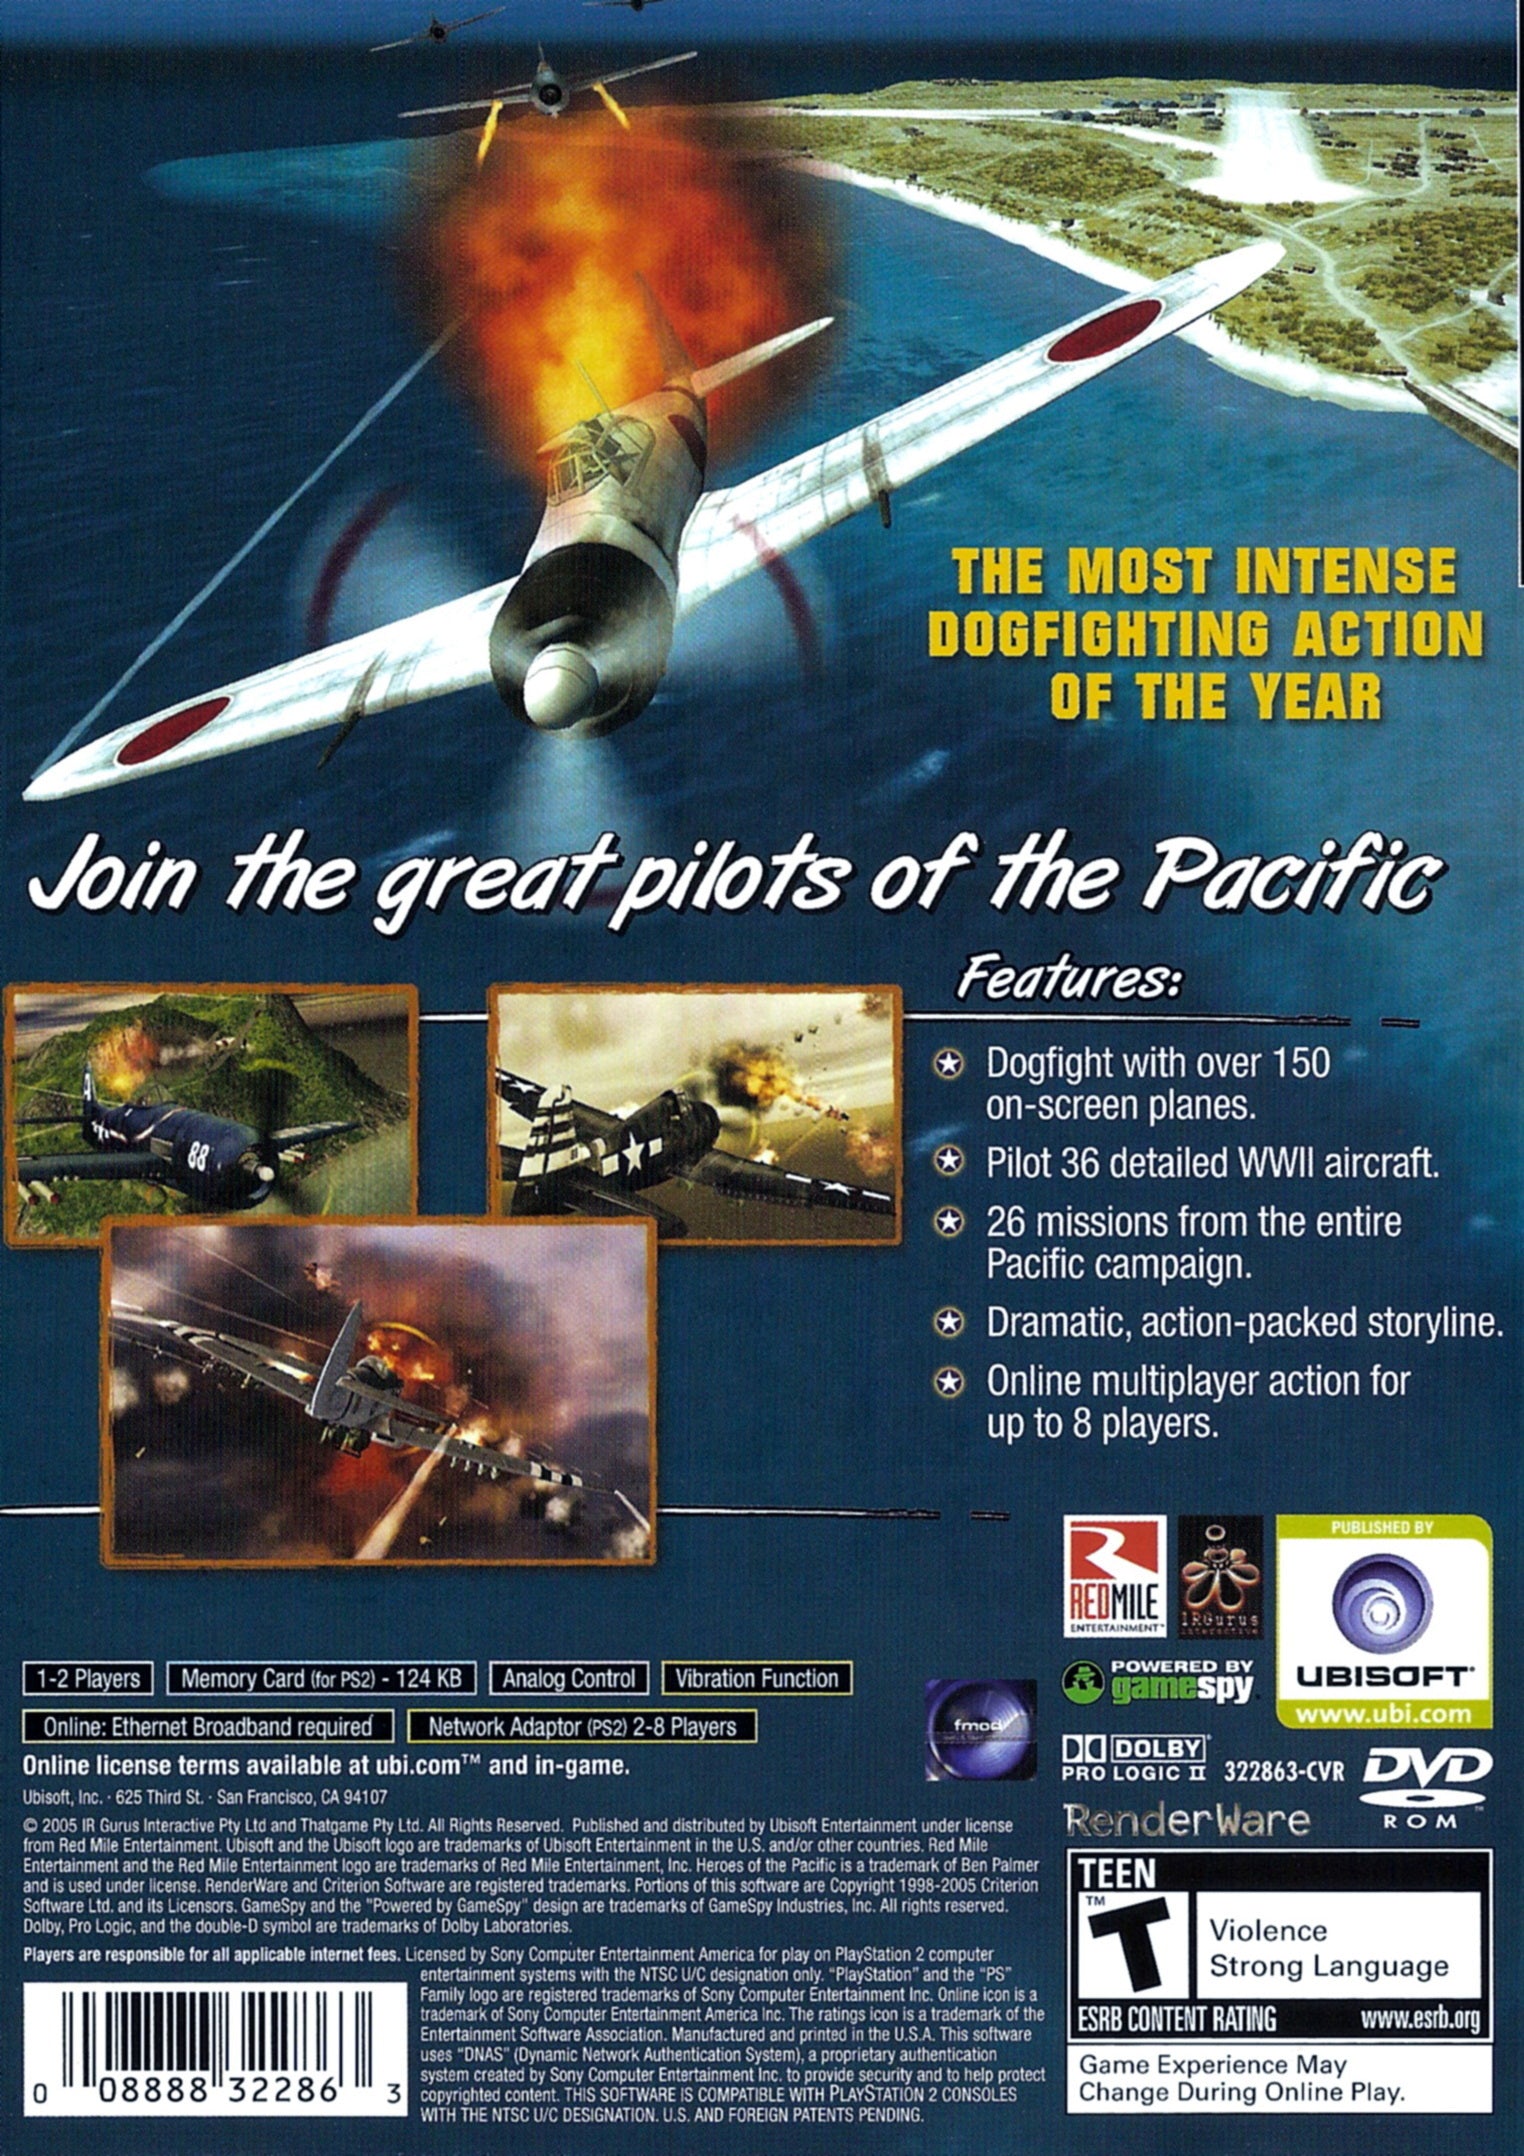 Heroes of the Pacific - (PS2) PlayStation 2 [Pre-Owned] Video Games Ubisoft   